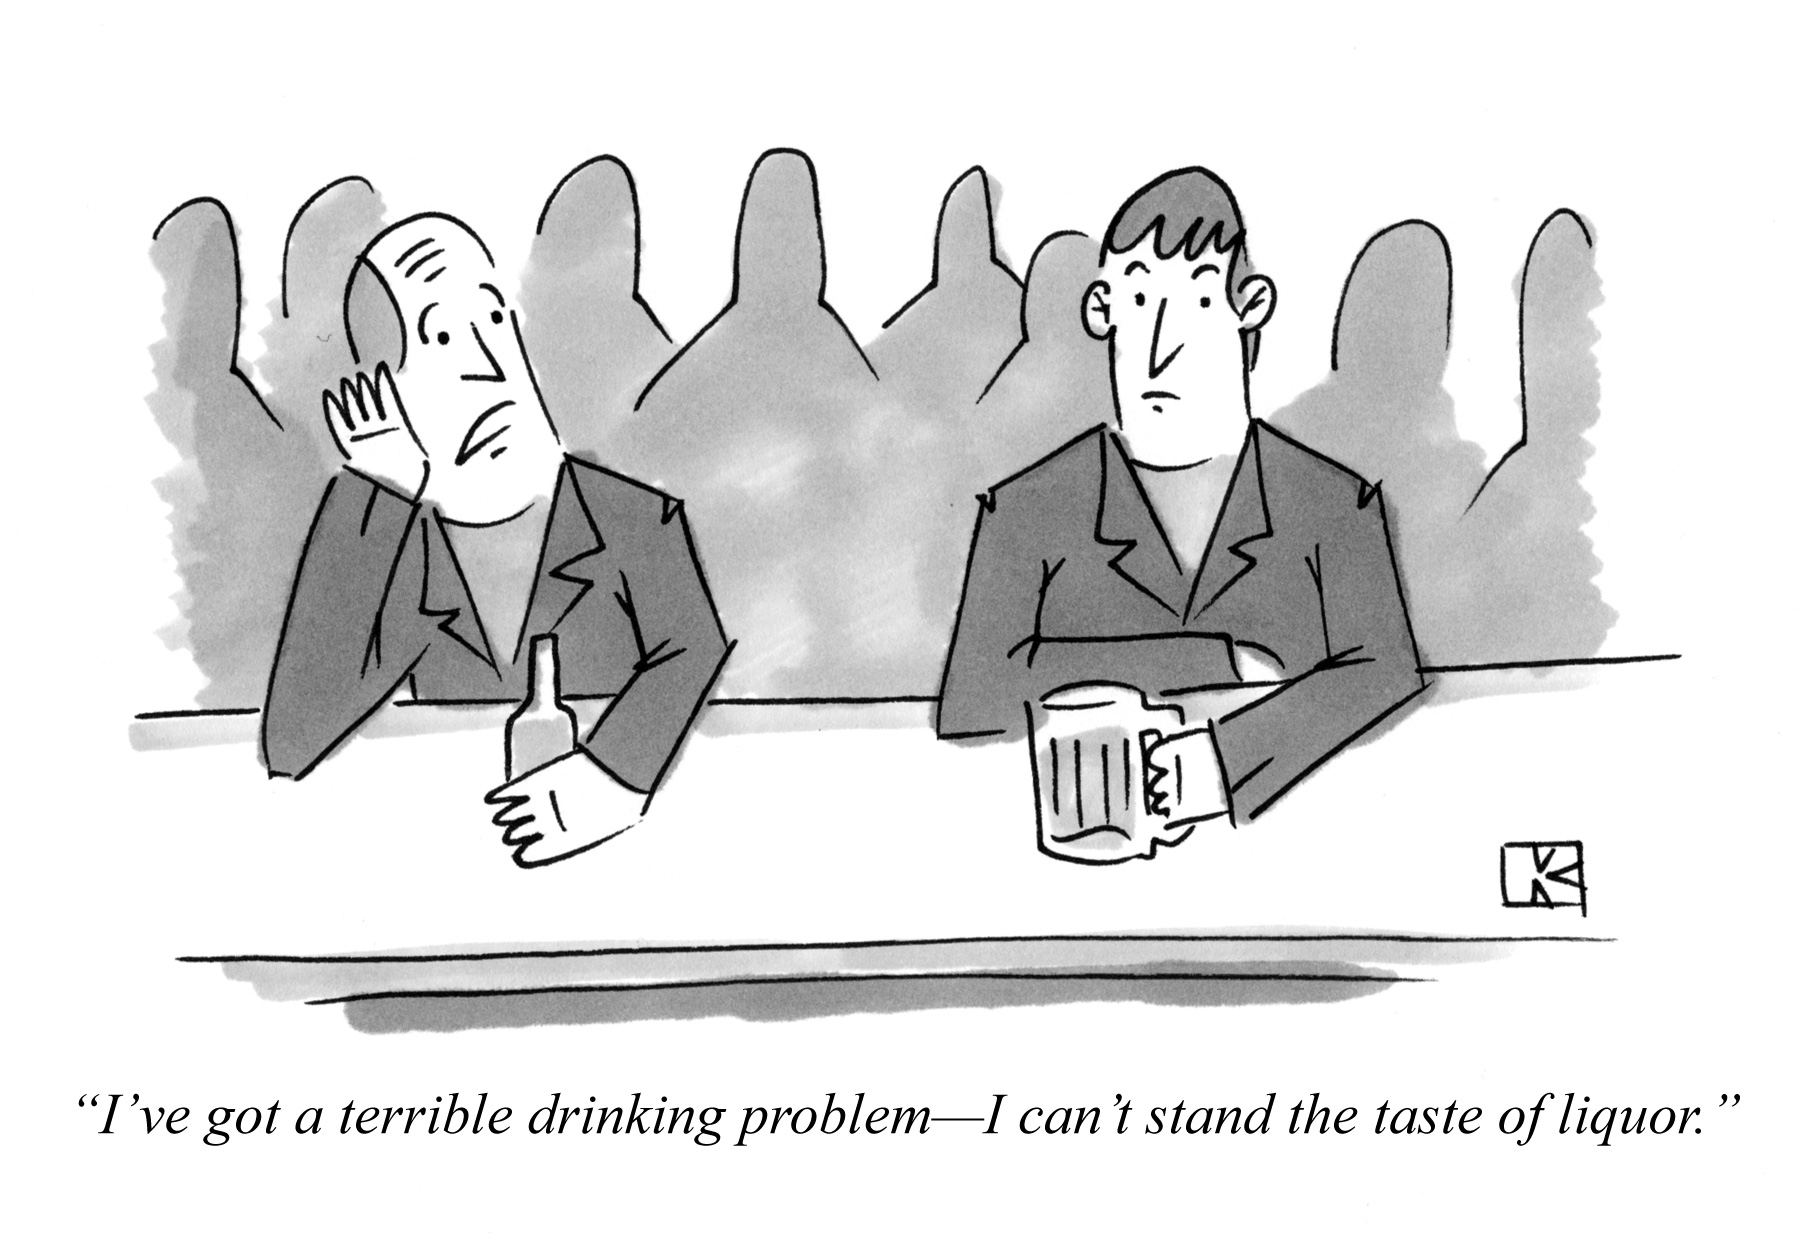 I've got a terrible drinking problem—I can't stand the taste of liquor.